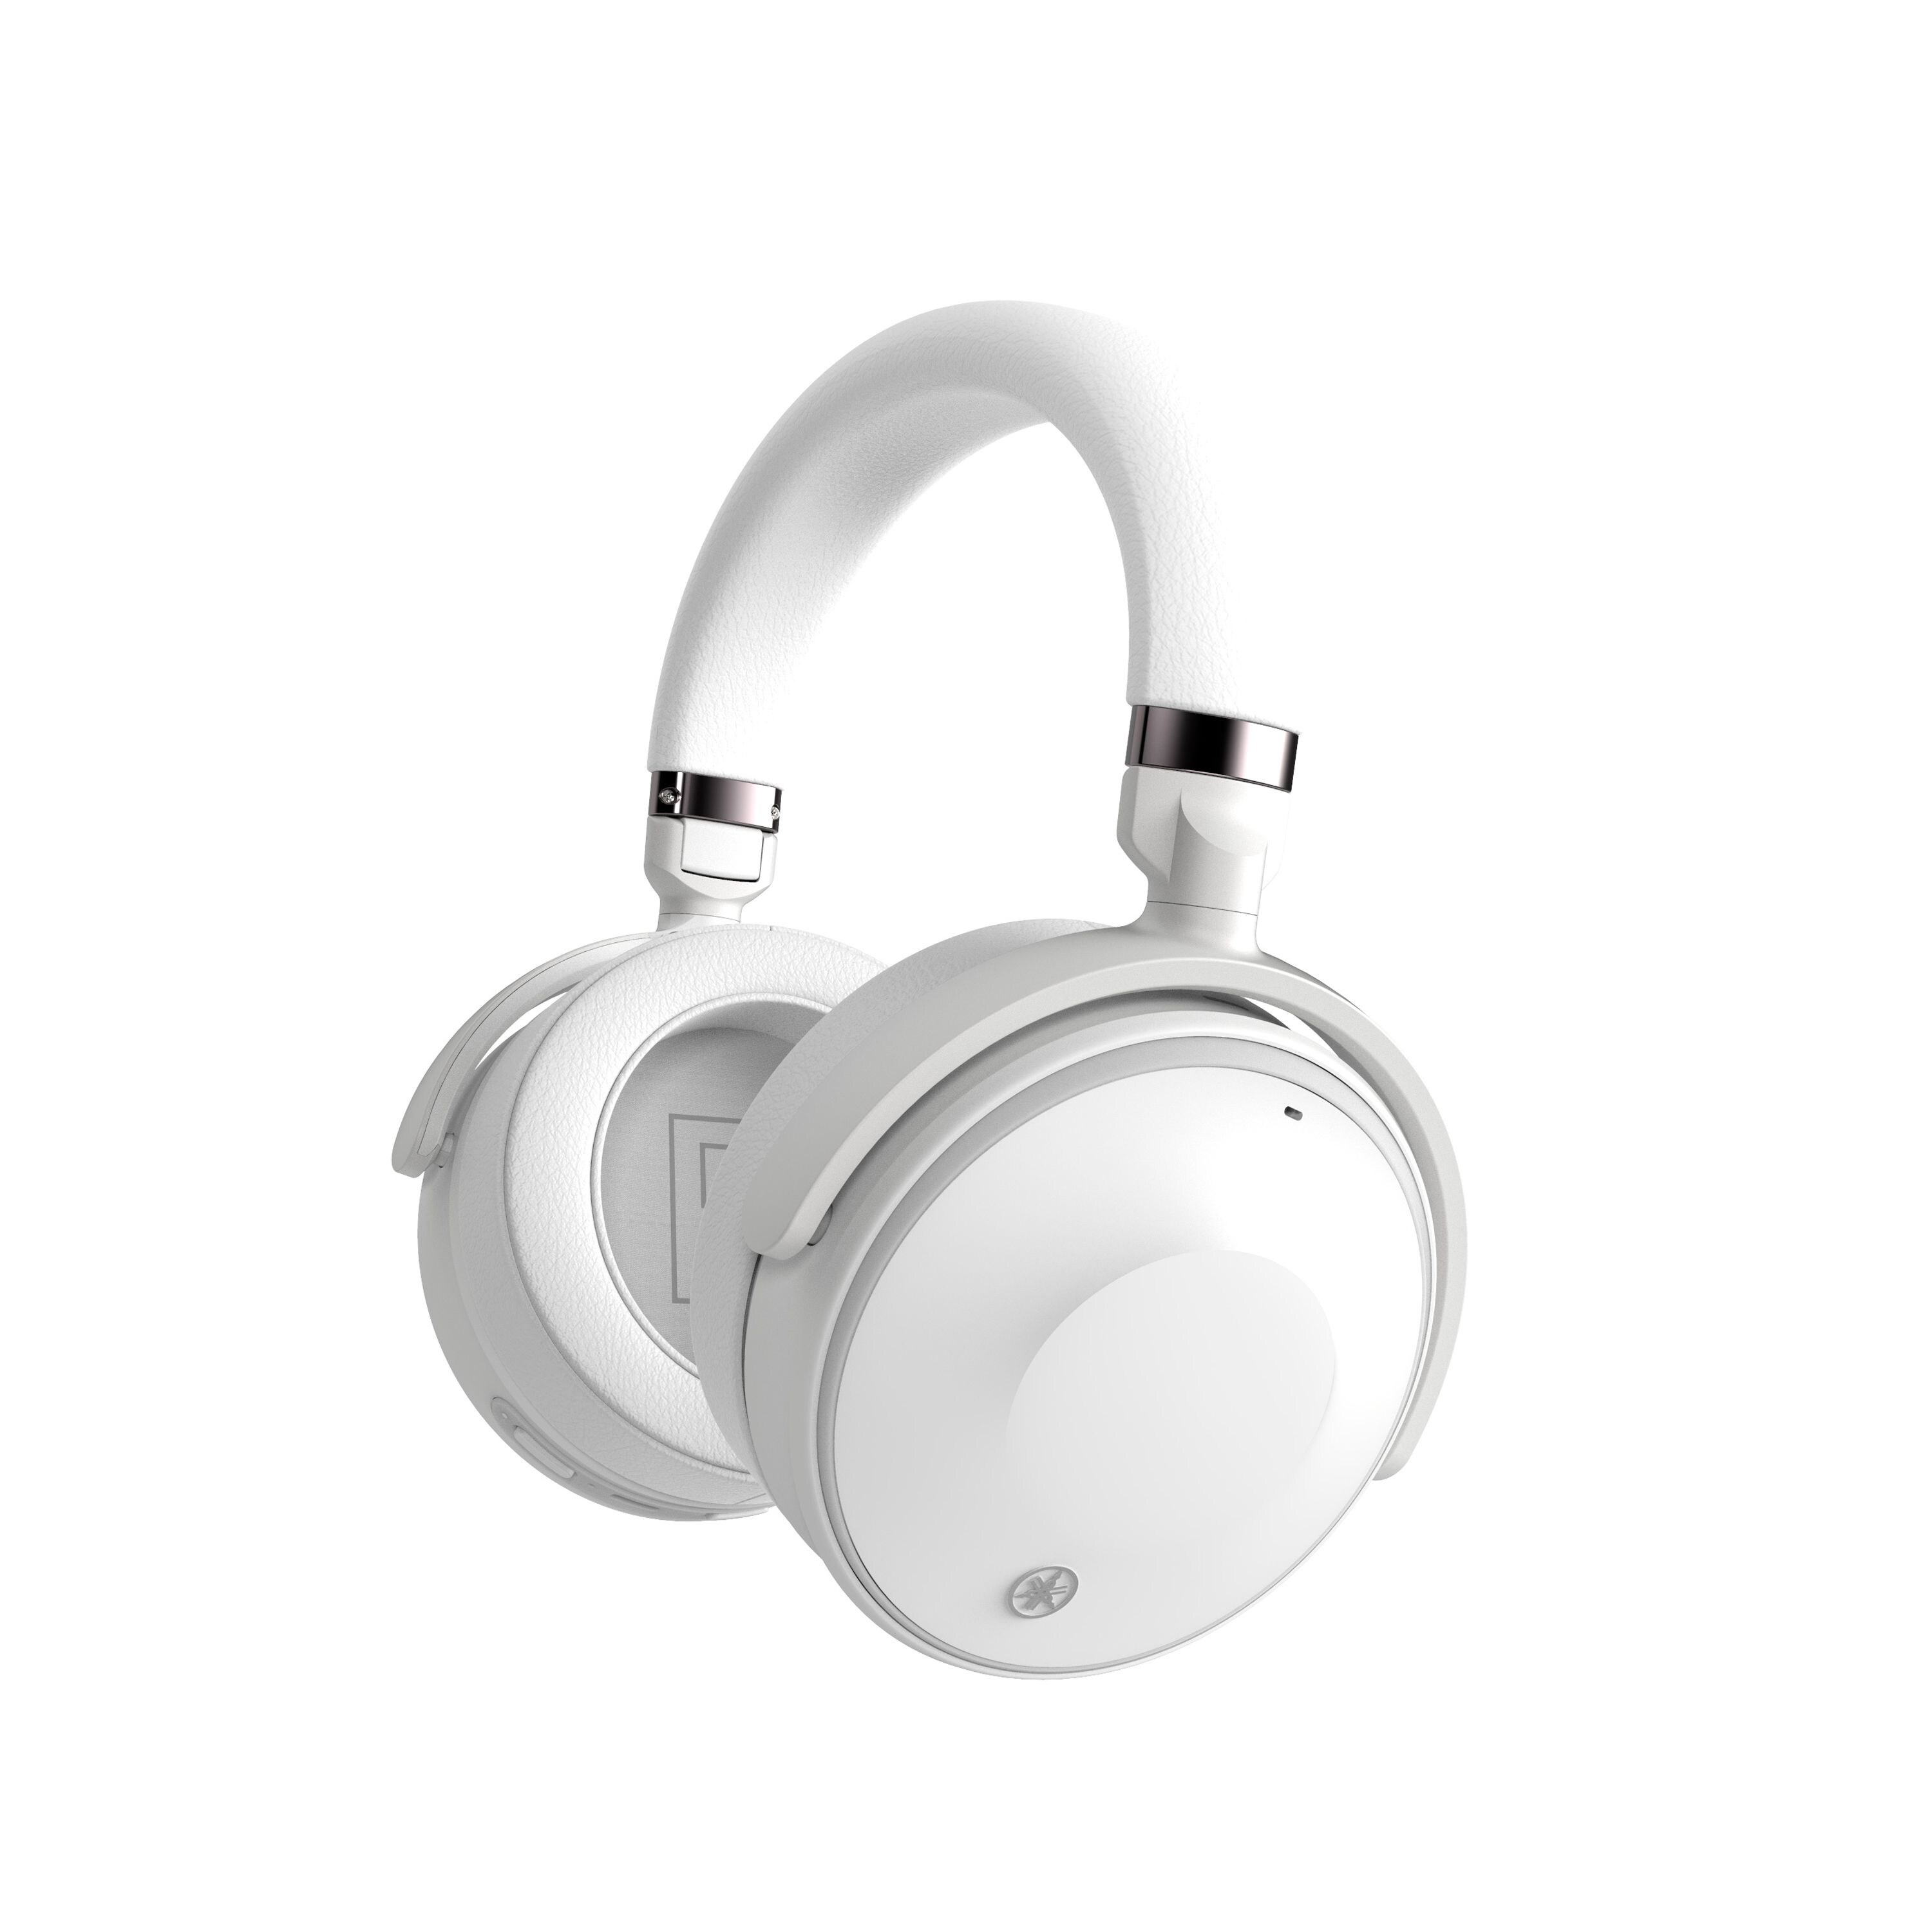 Yamaha YH-E700A Wireless Over-Ear Headphones with Advanced ANC White Listening Optimizer and Listening Care